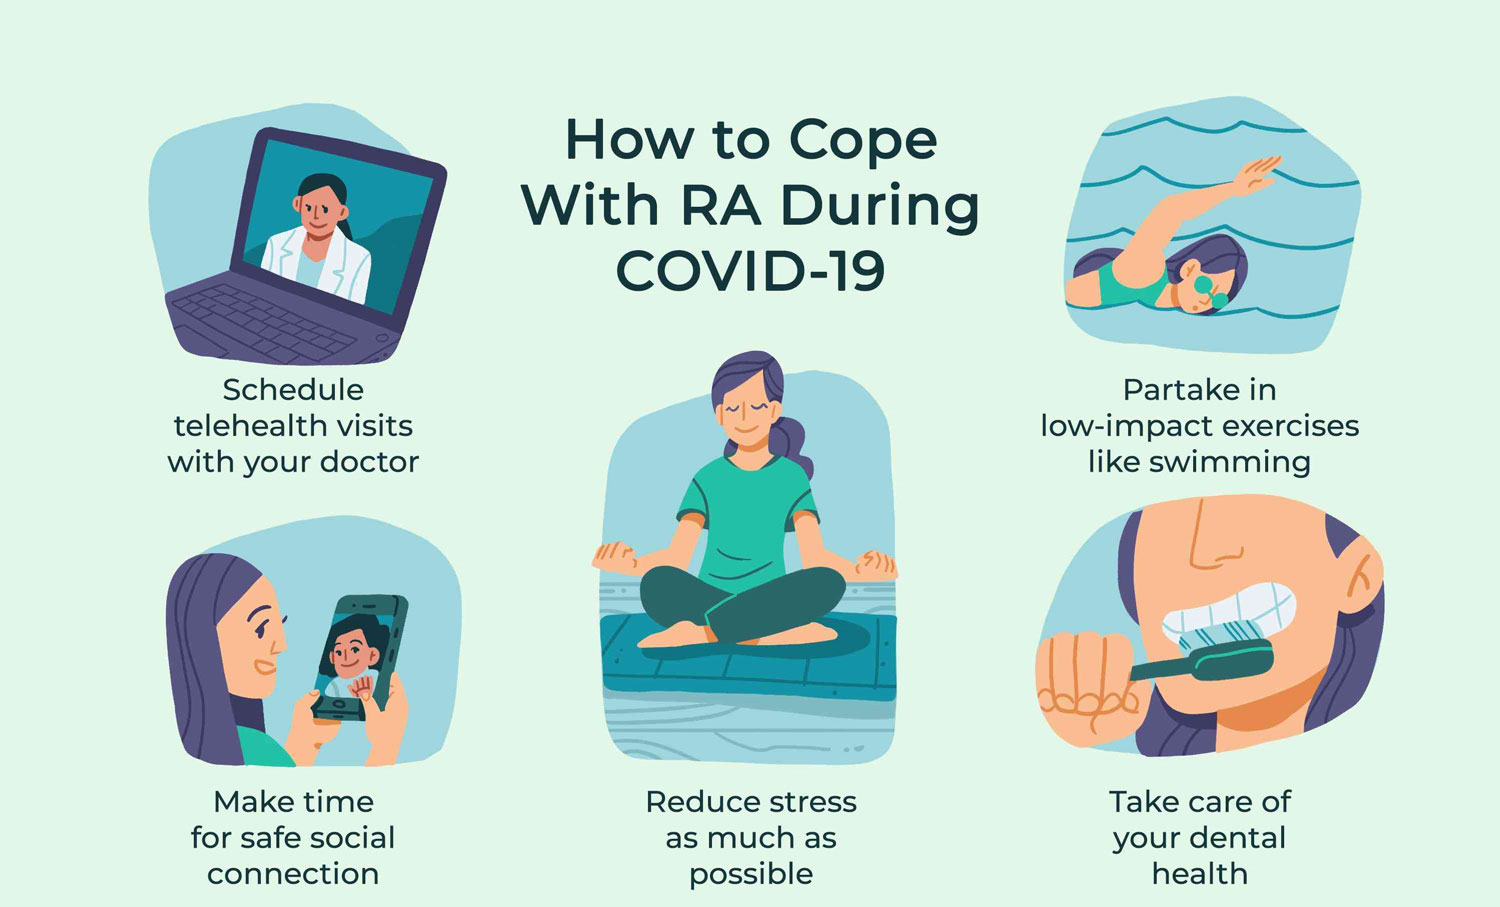 
How to Cope with RA During COVID-19
